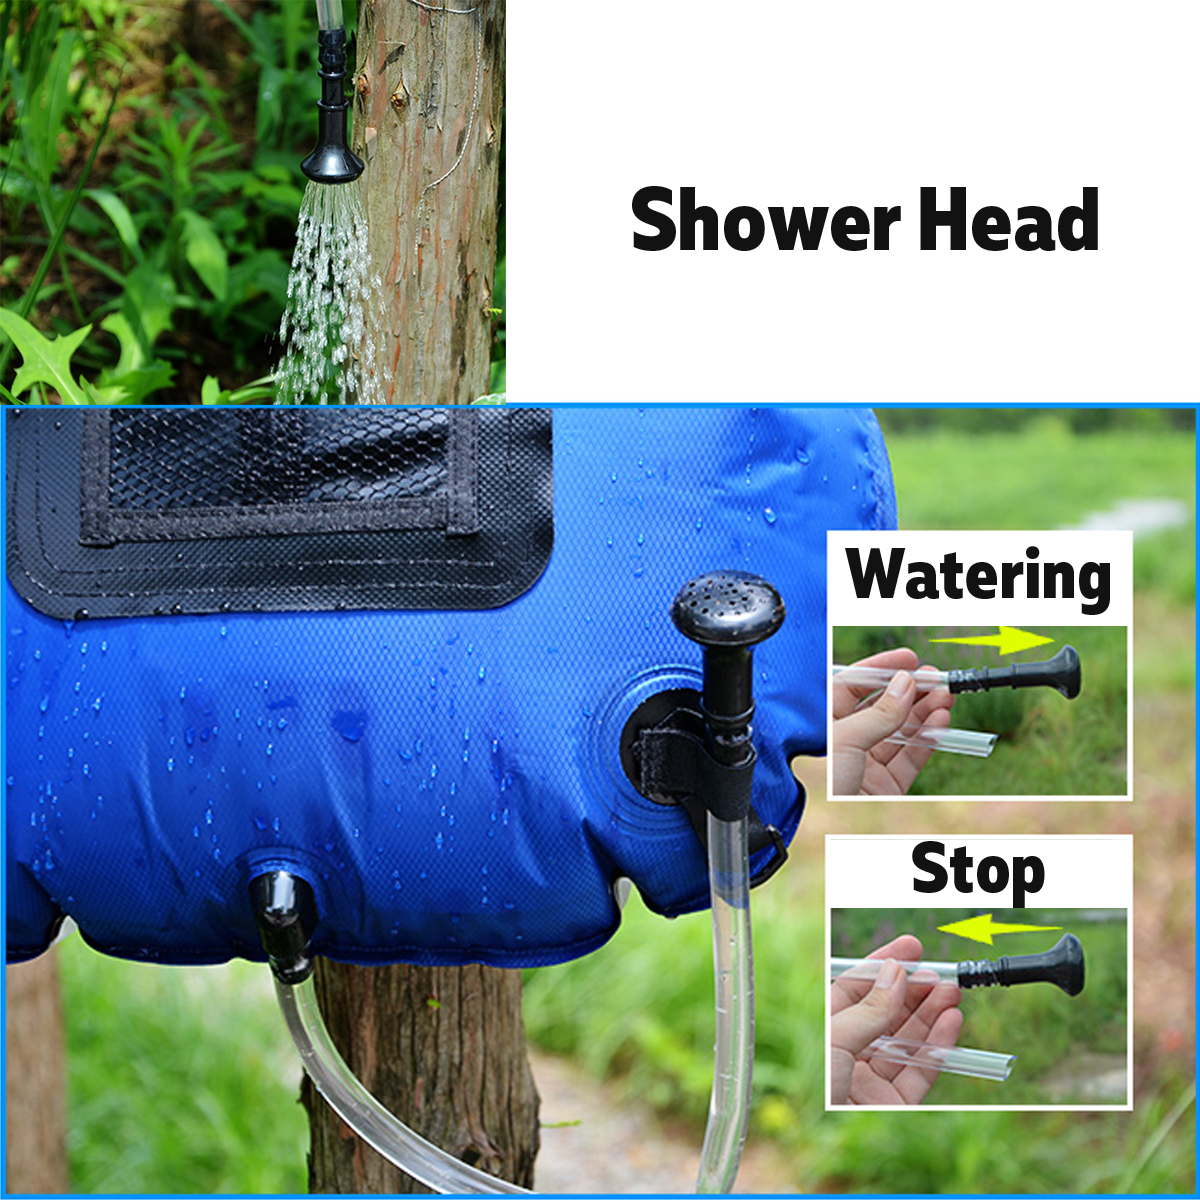 20L-Foldable-Portable-Water-Shower-Bathing-Bag-Solar-Energy-Heated-PVC-Outdoor-Travel-Camping-1724741-4